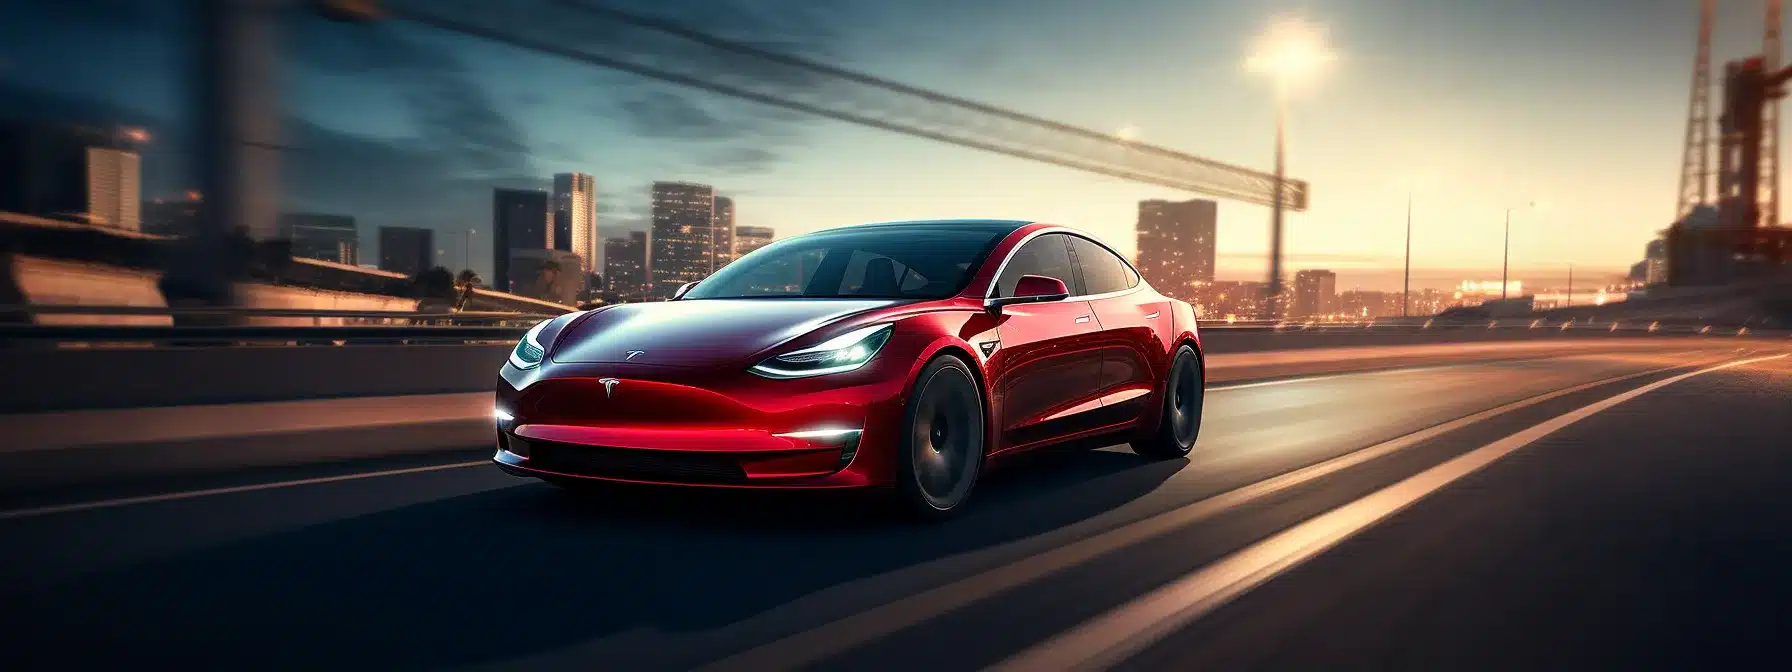 A Cherry Red Tesla Zipping Past, Showcasing Its Commitment To Sustainable Technology.